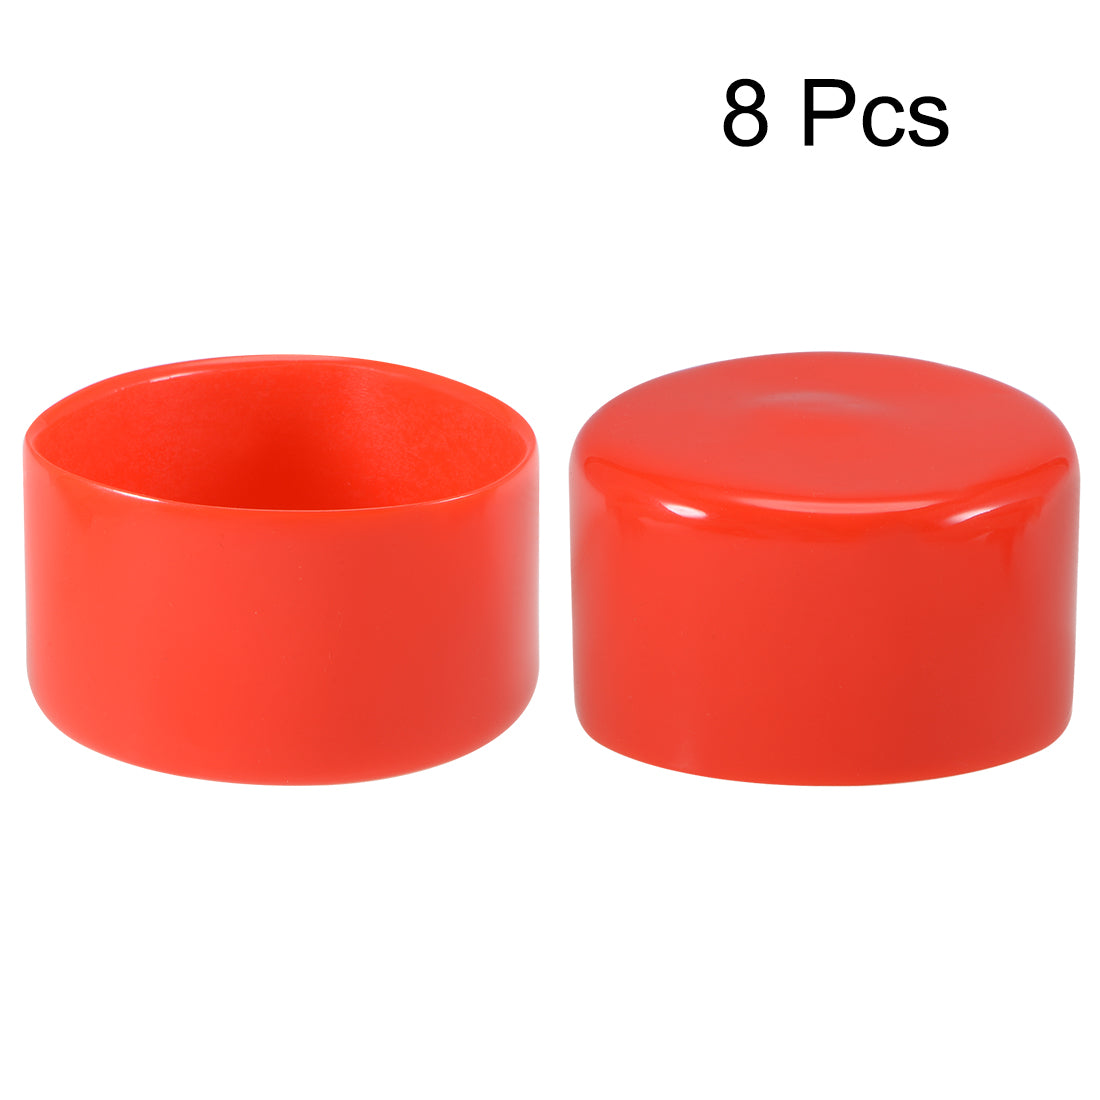 uxcell Uxcell 8pcs Rubber End Caps 55mm ID 43mm Height Screw Thread Protectors Red